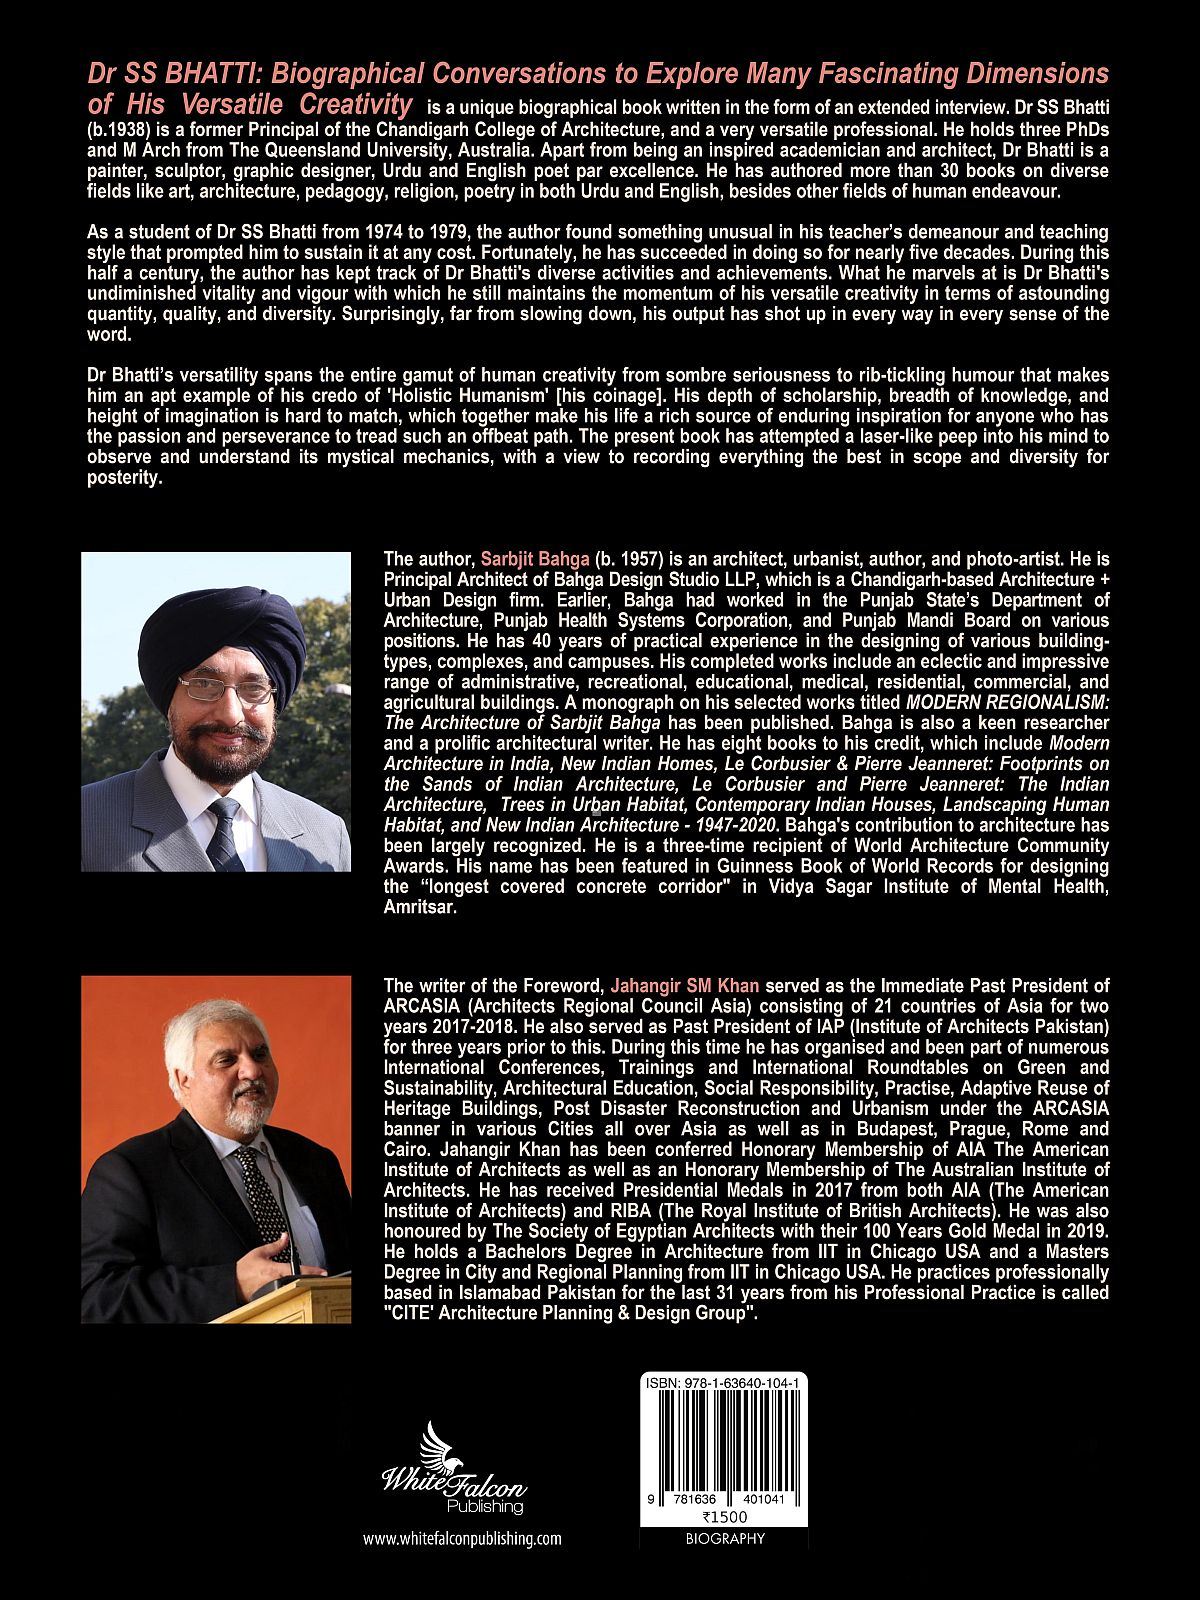 Book: Dr S.S.Bhatti: Biographical Conversations, authored by Sarbjit Bahga, Reviewed by Surinder Bahga 3